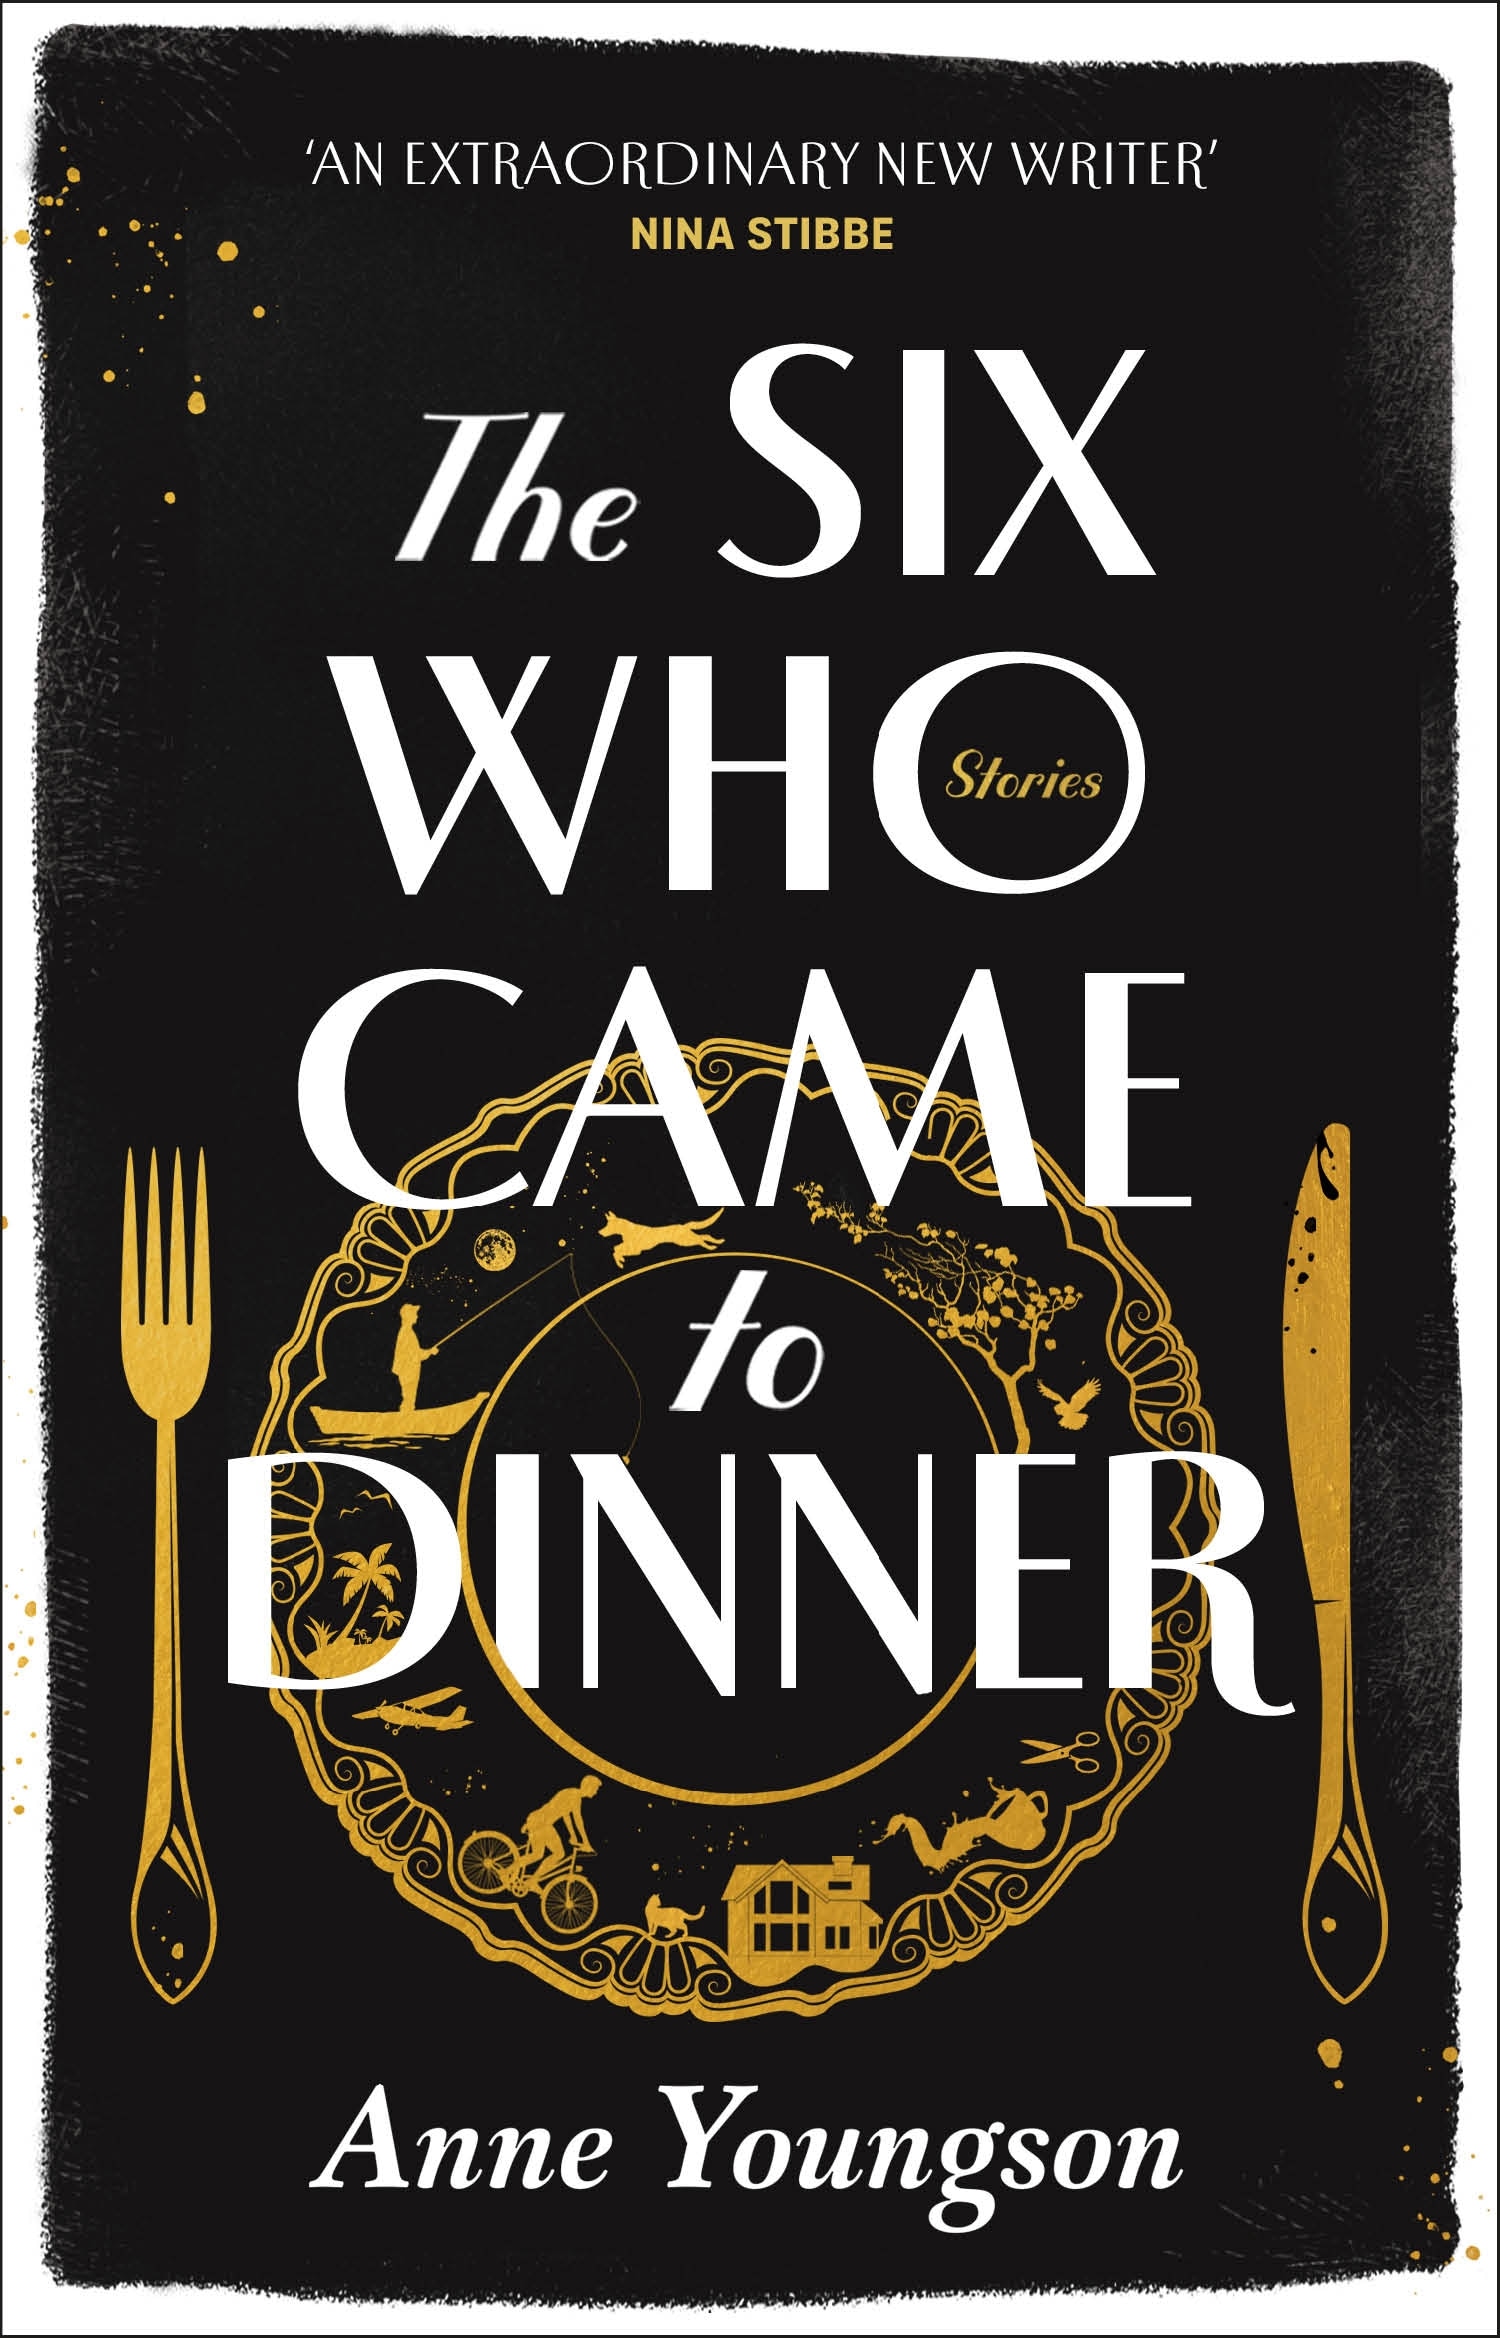 Book “The Six Who Came to Dinner” by Anne Youngson — October 6, 2022